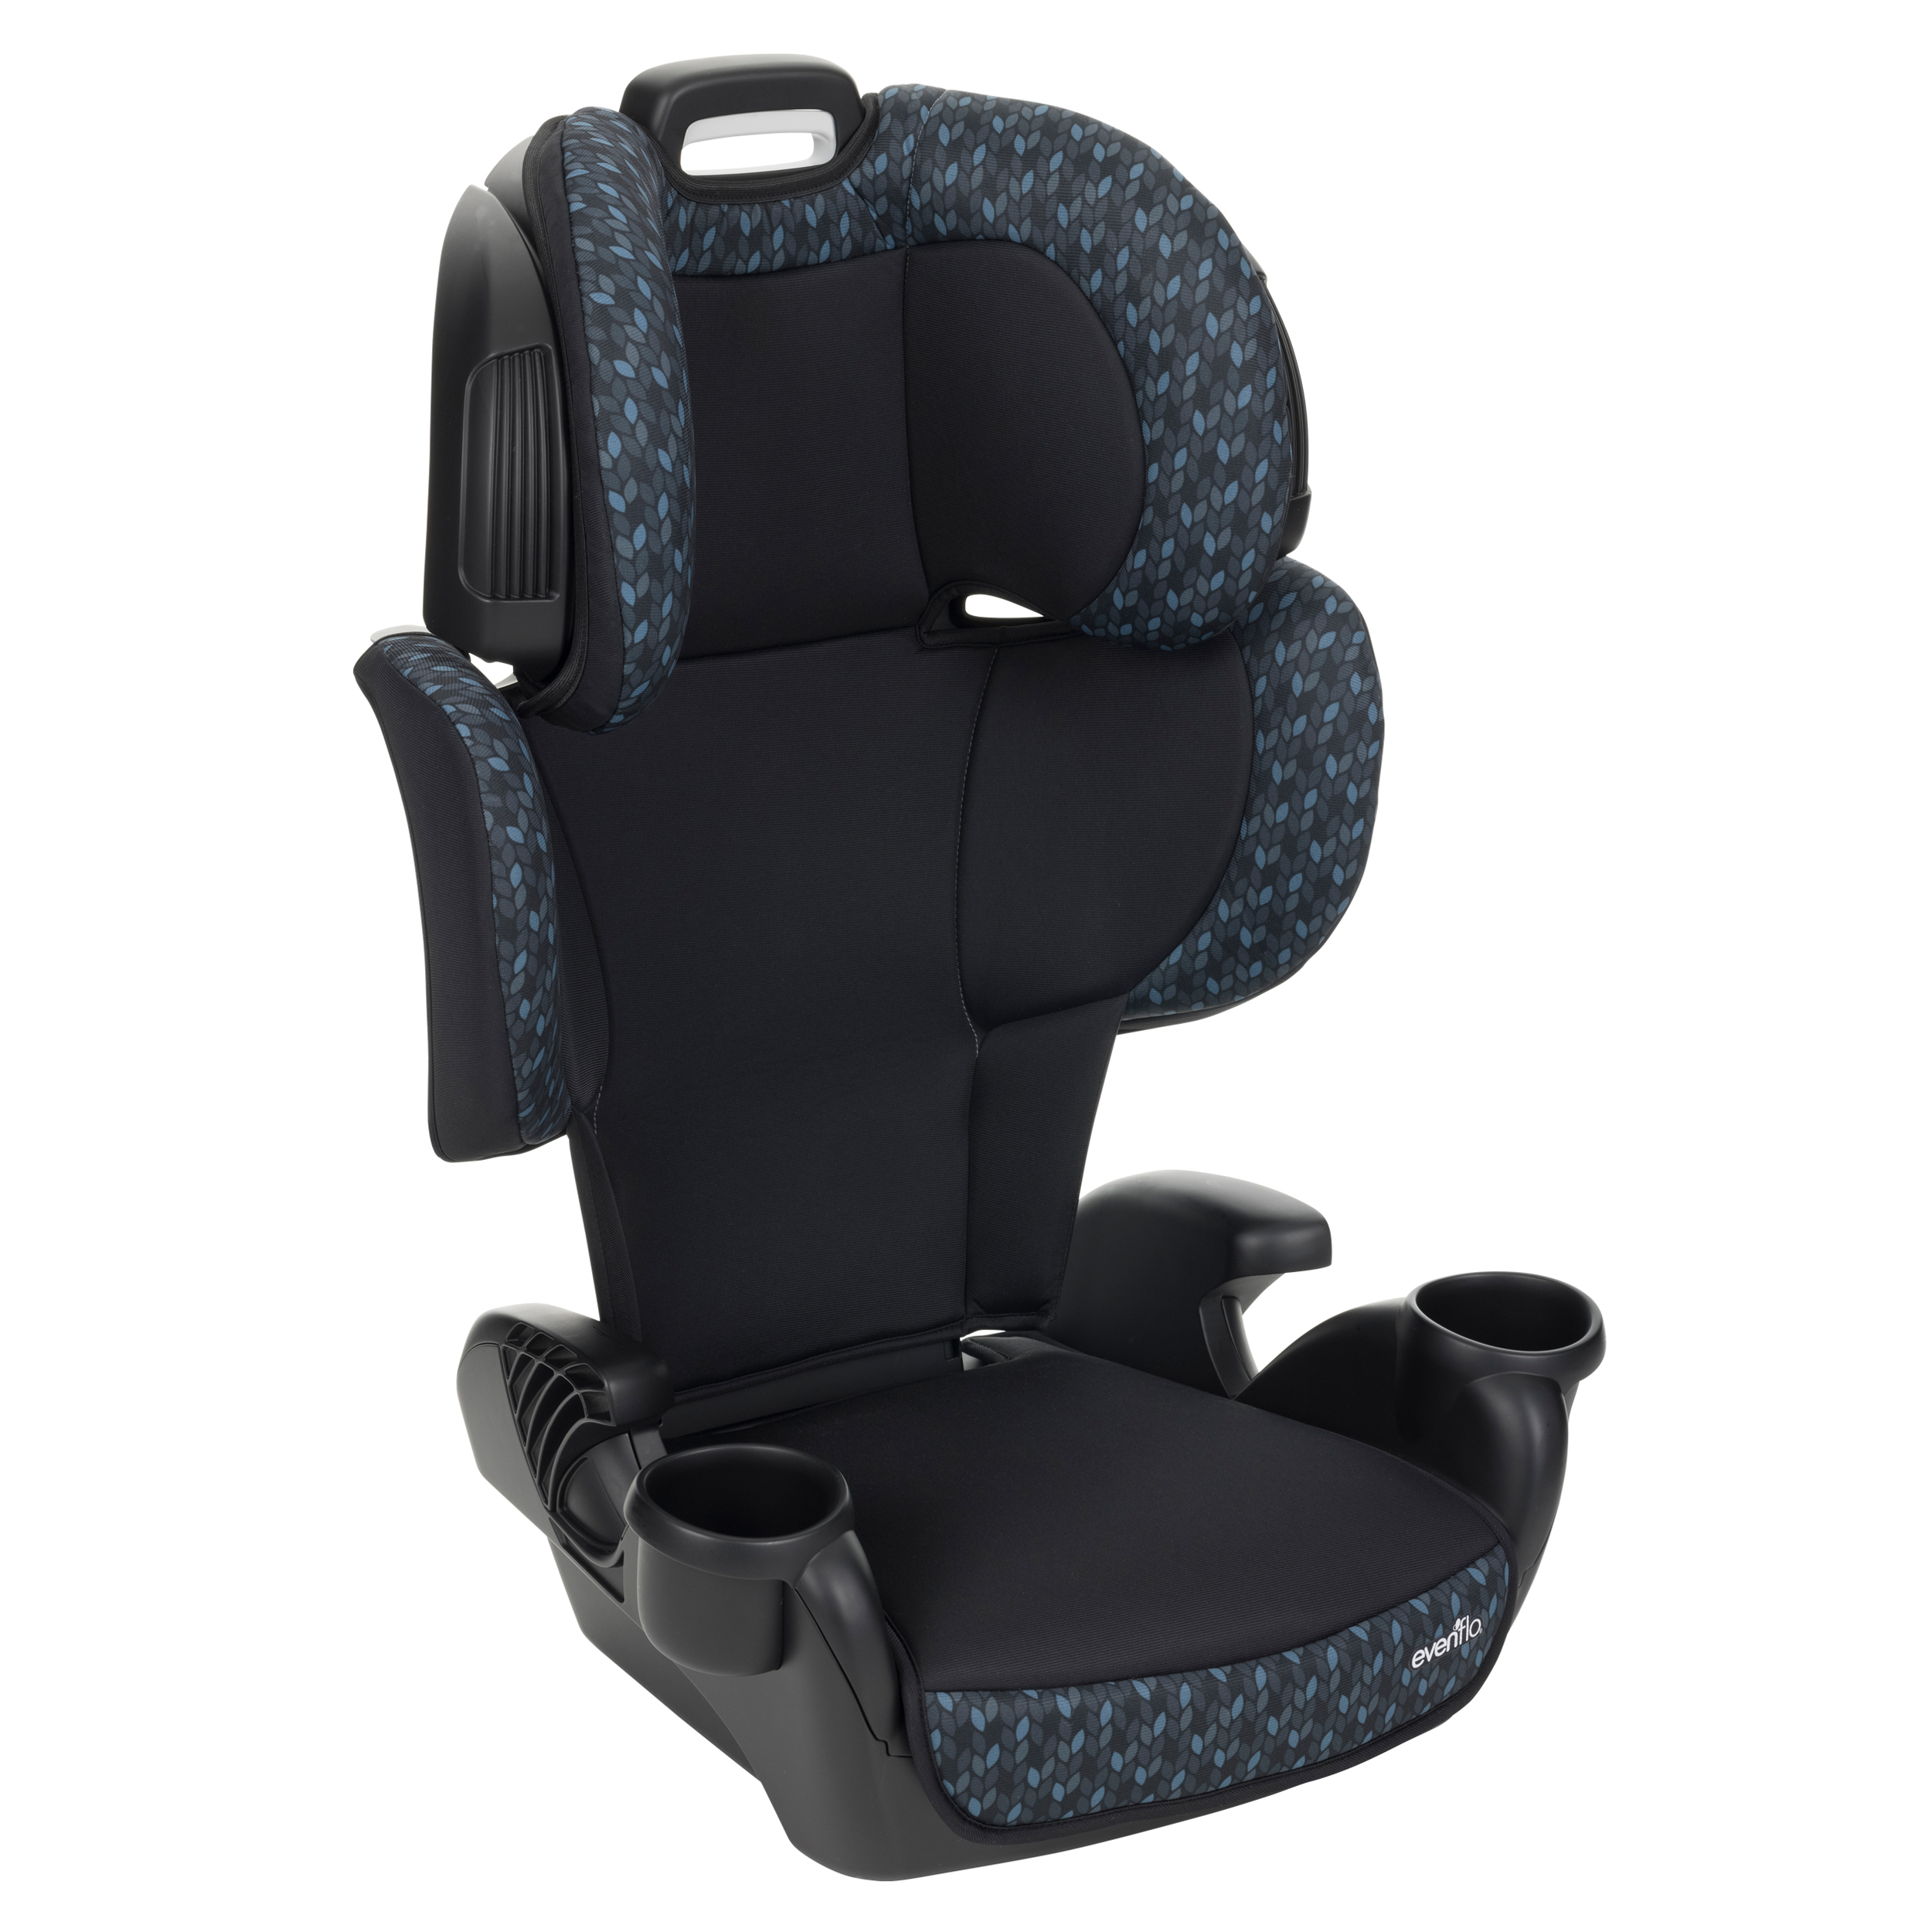 Evenflo GoTime LX Booster Car Seat (Quincy Blue), 4 Years + - image 5 of 12